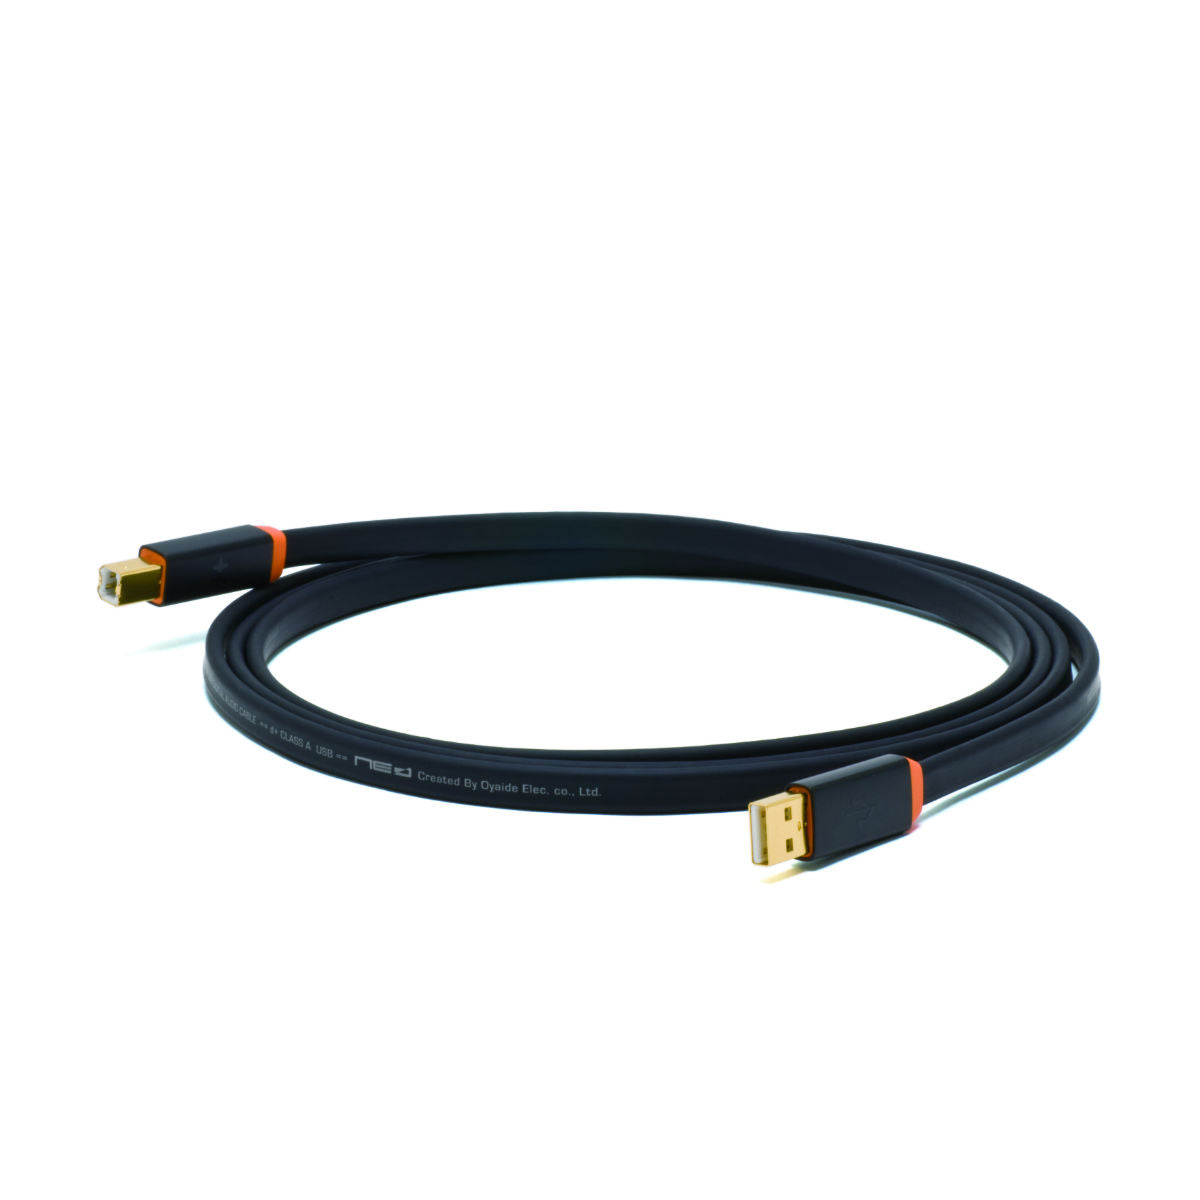 NEO D+ Class A USB A to B Cable - 1m